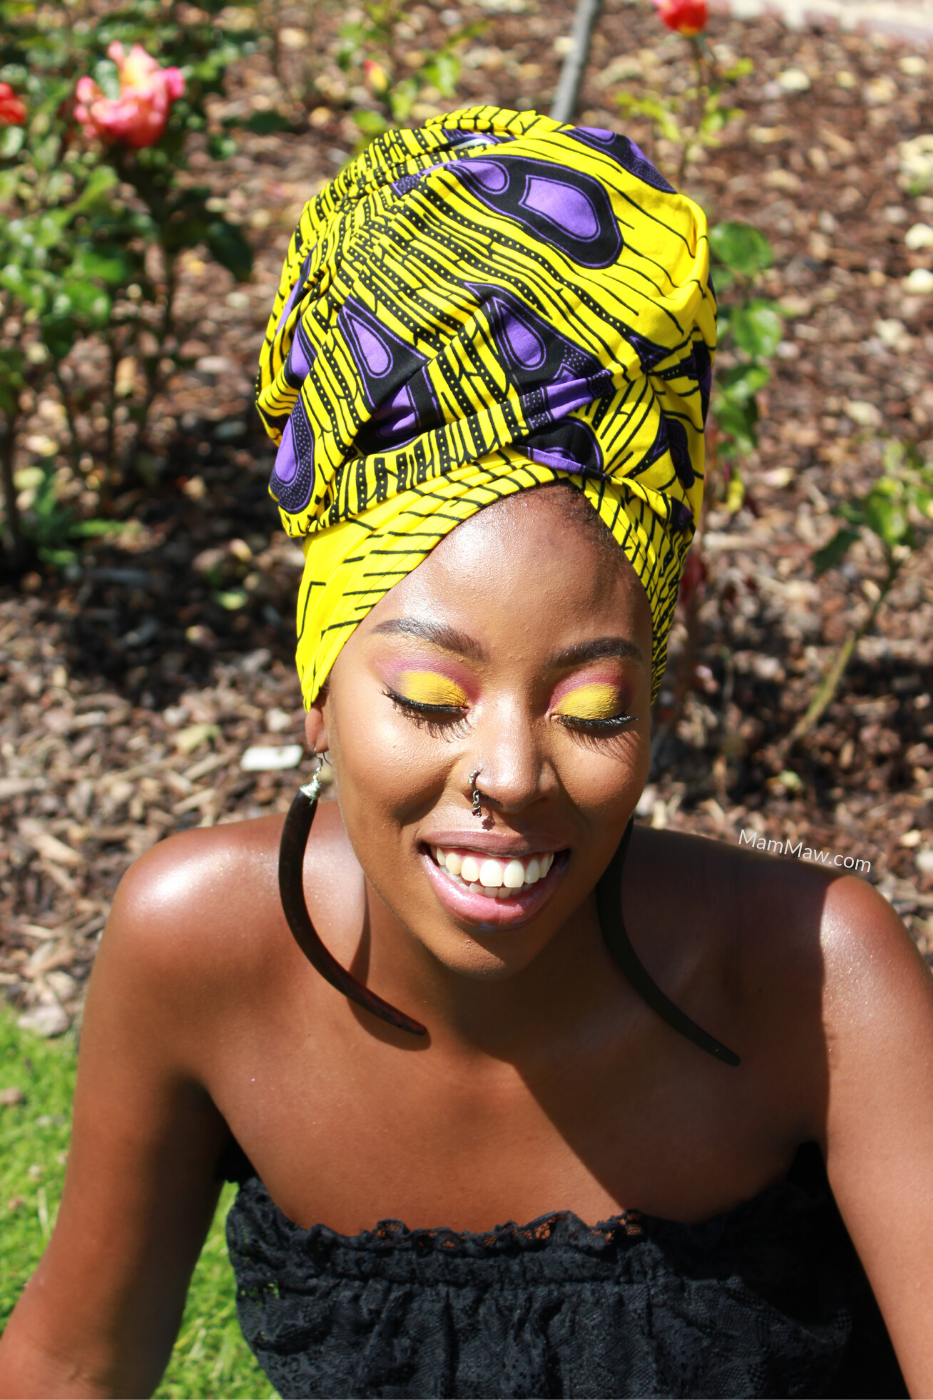 Teal African fabric Head wraps, African headwraps / HT362